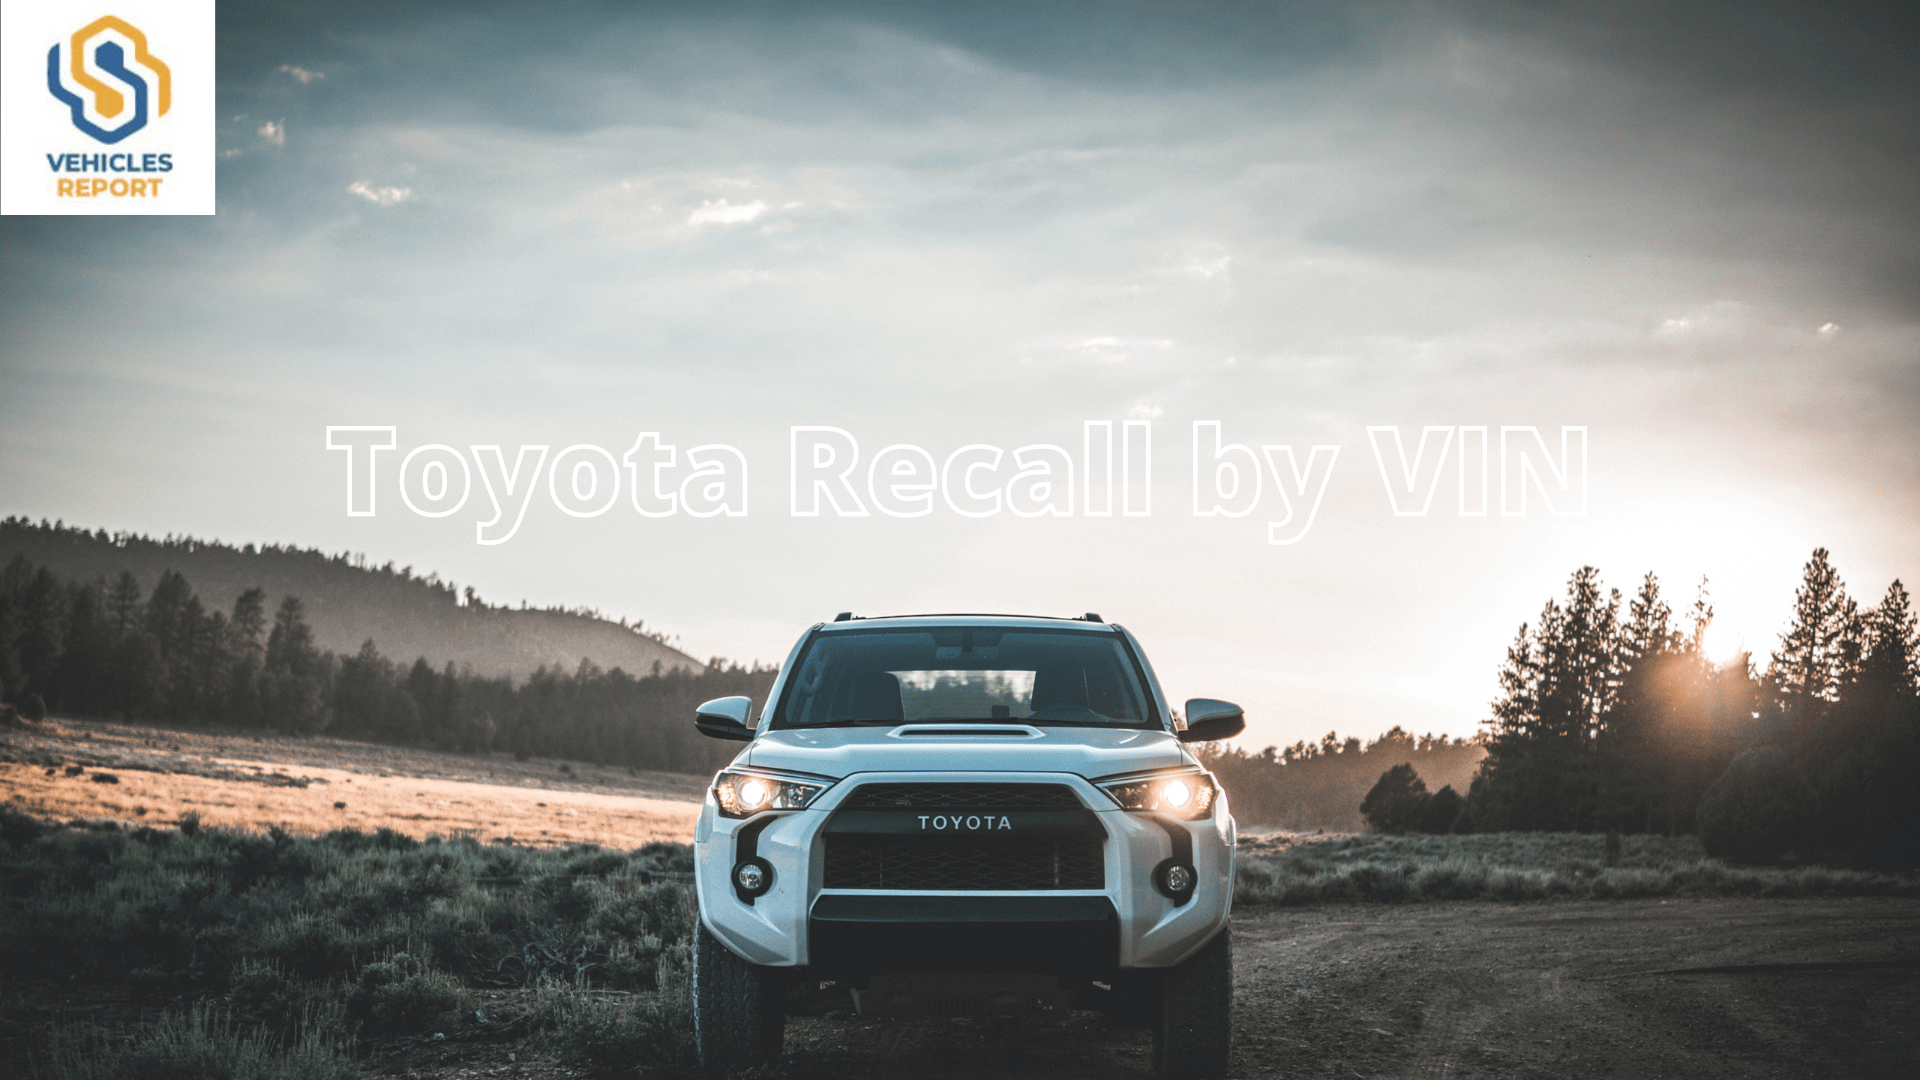 How To Check Toyota Recall By VIN